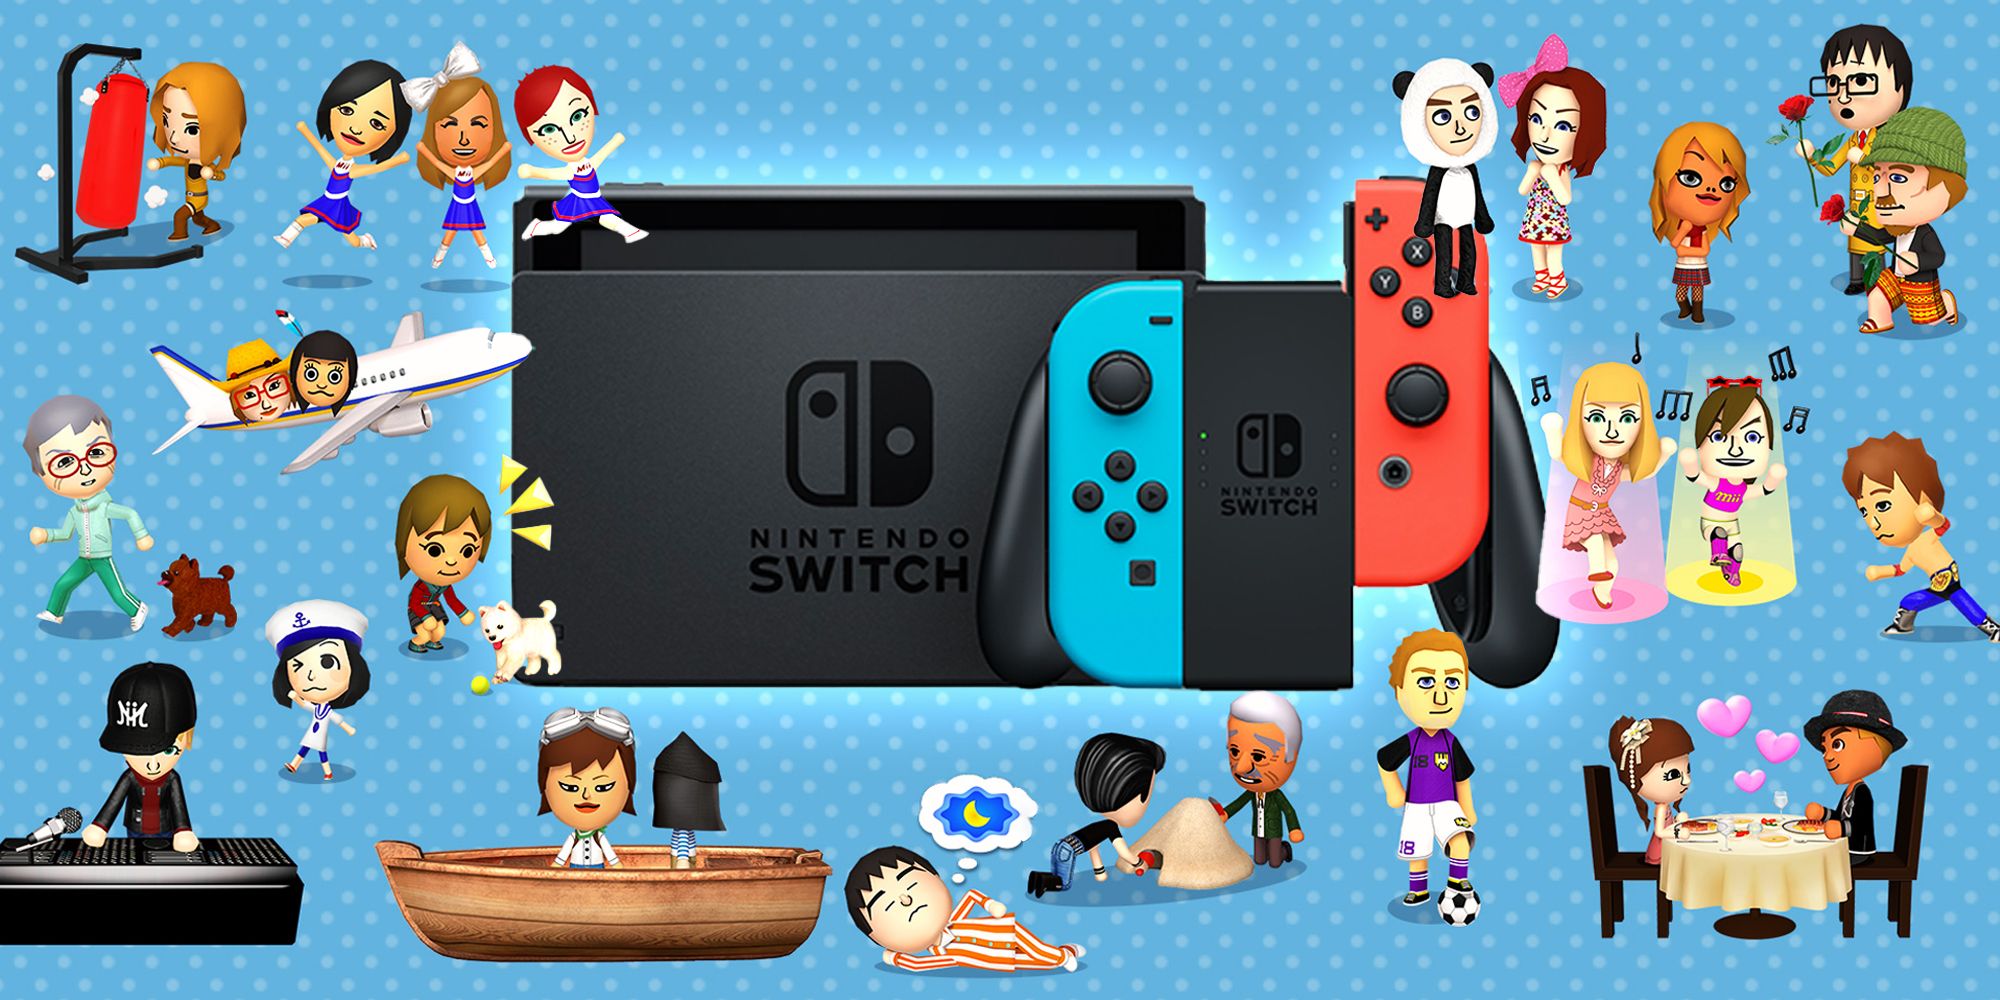 A wide variety of Miis engaged in various activities, like boxing, cheerleading, dog walking, DJing, boat riding, napping, sand castle building, romantic dining, and dancing, surround an image of a Nintendo Switch.